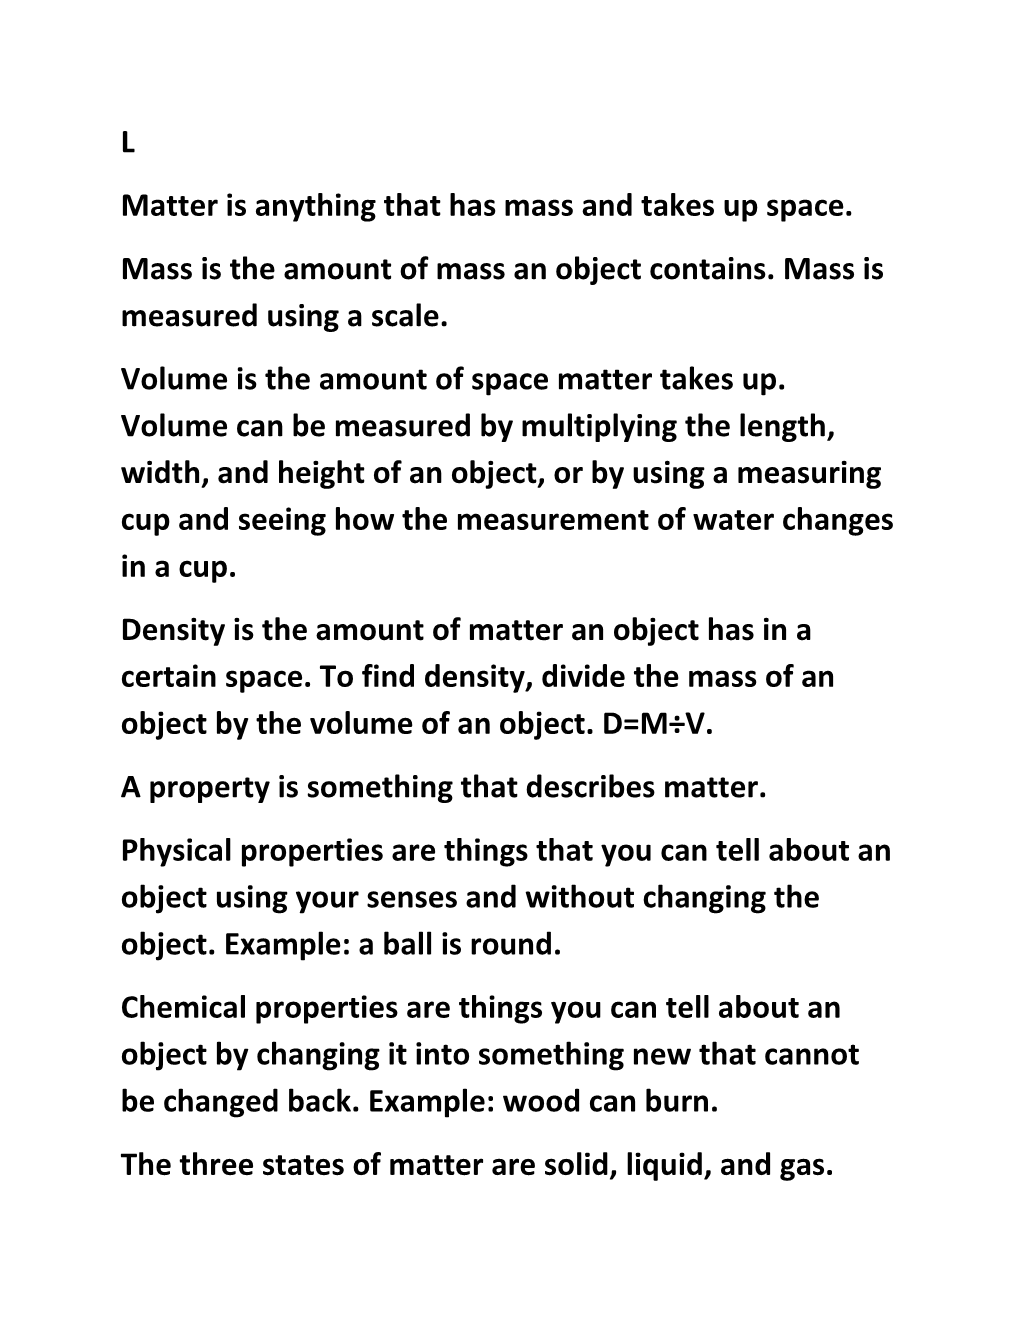 Matter Is Anything That Has Mass and Takes up Space. Mass Is the Amount of Mass an Object Contains